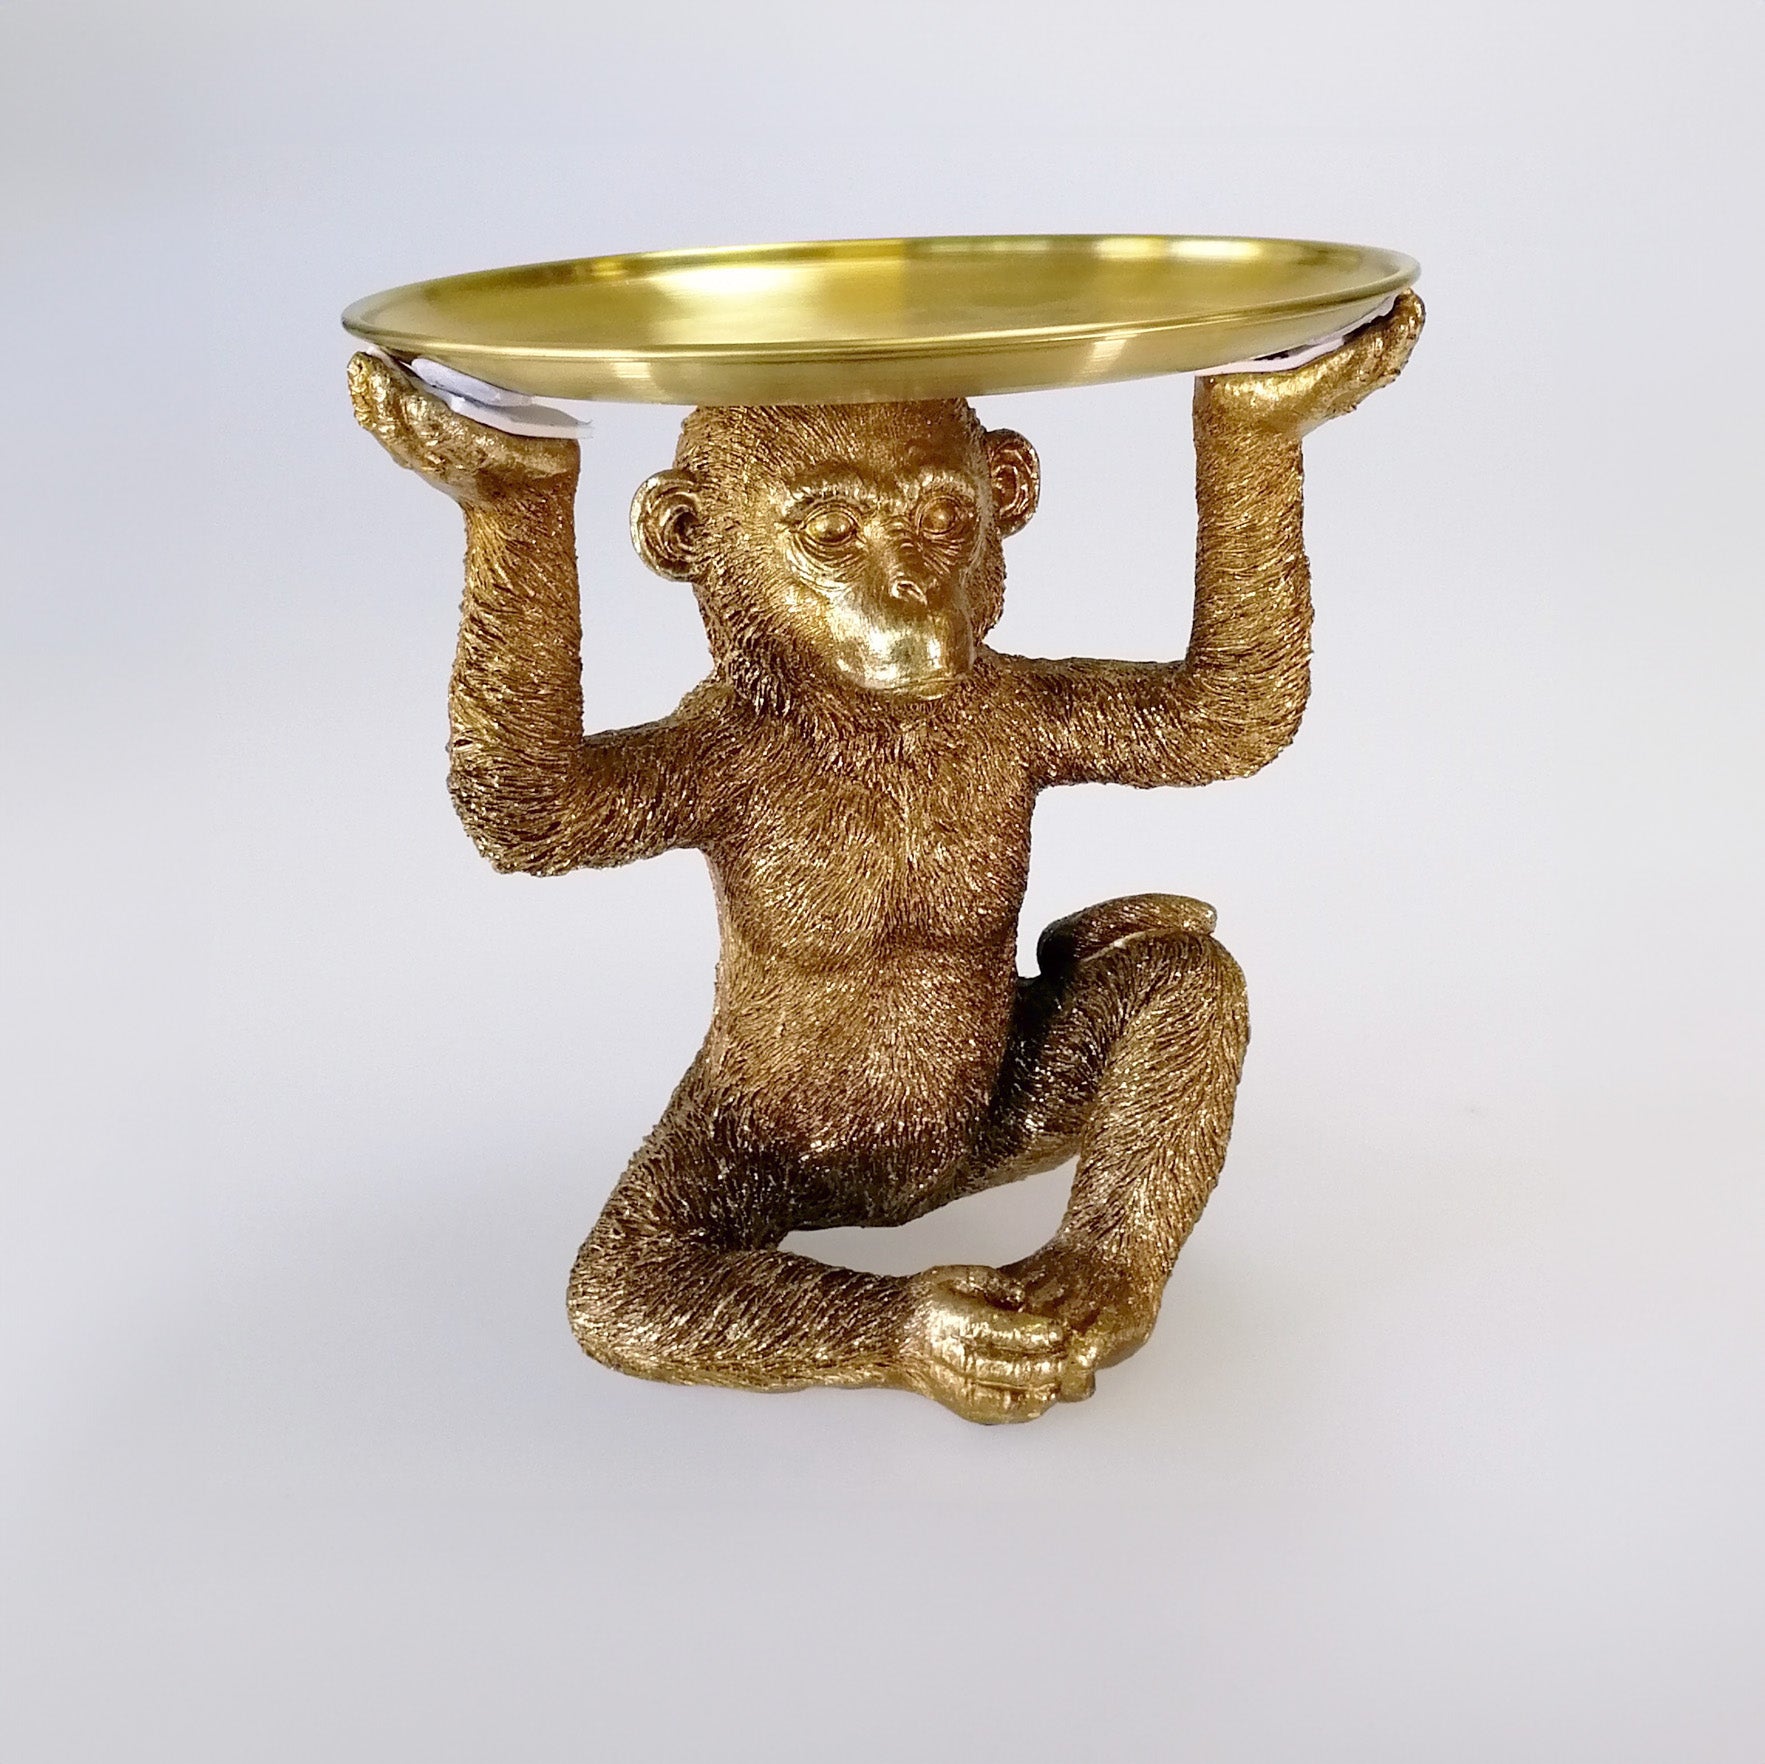 Painted Gold monkeys & Gold Tray